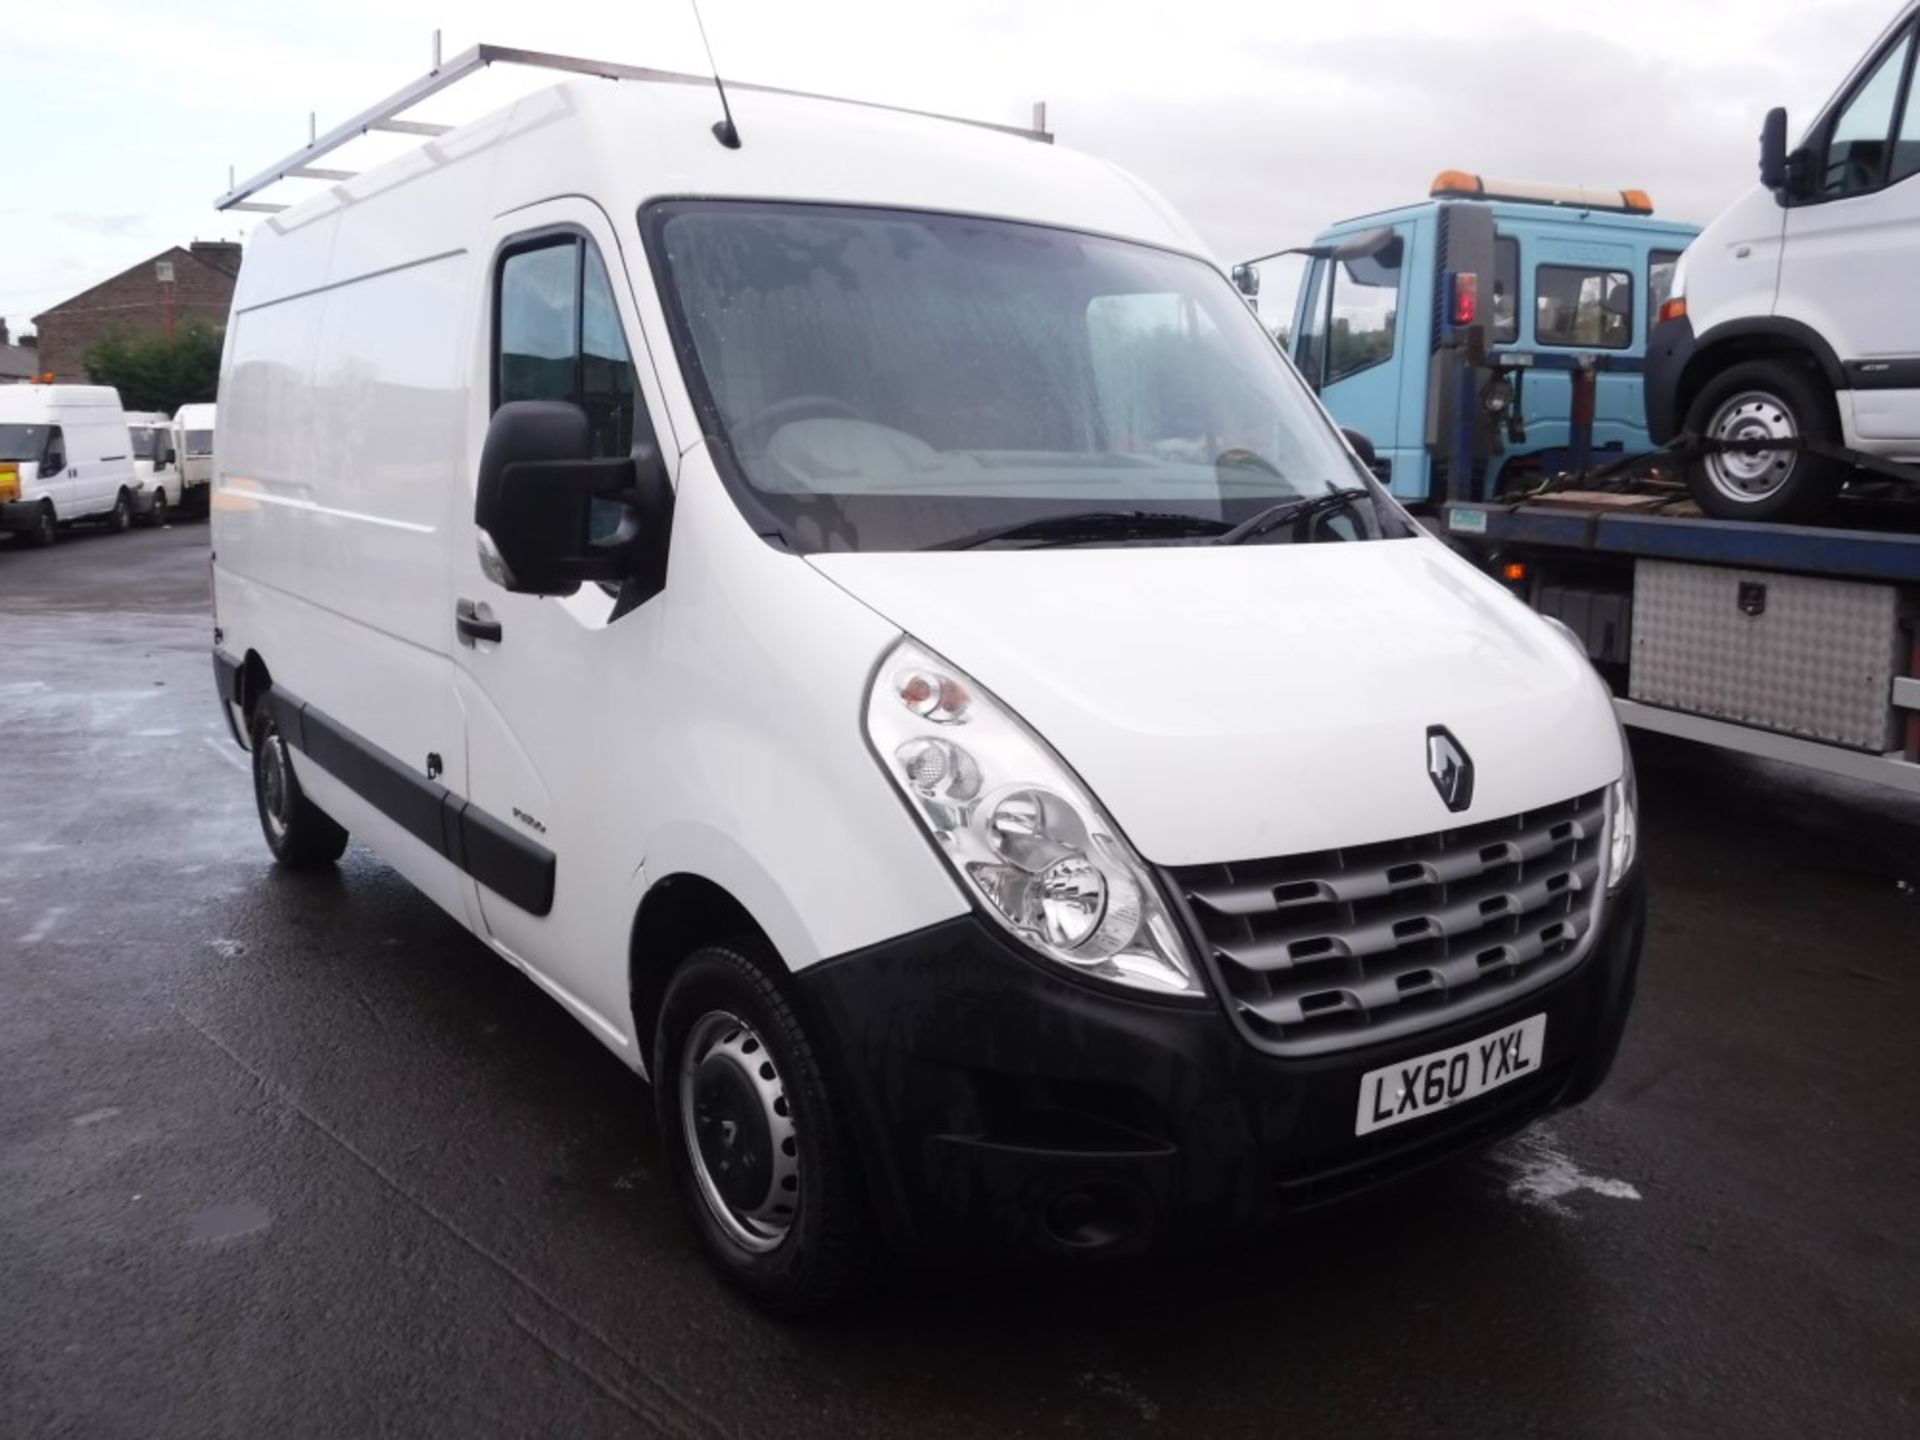 60 reg RENAULT MASTER MM35 DCI 100, 1ST REG 09/10, 214280M WARRANTED, V5 HERE, 1 OWNER FROM NEW [+